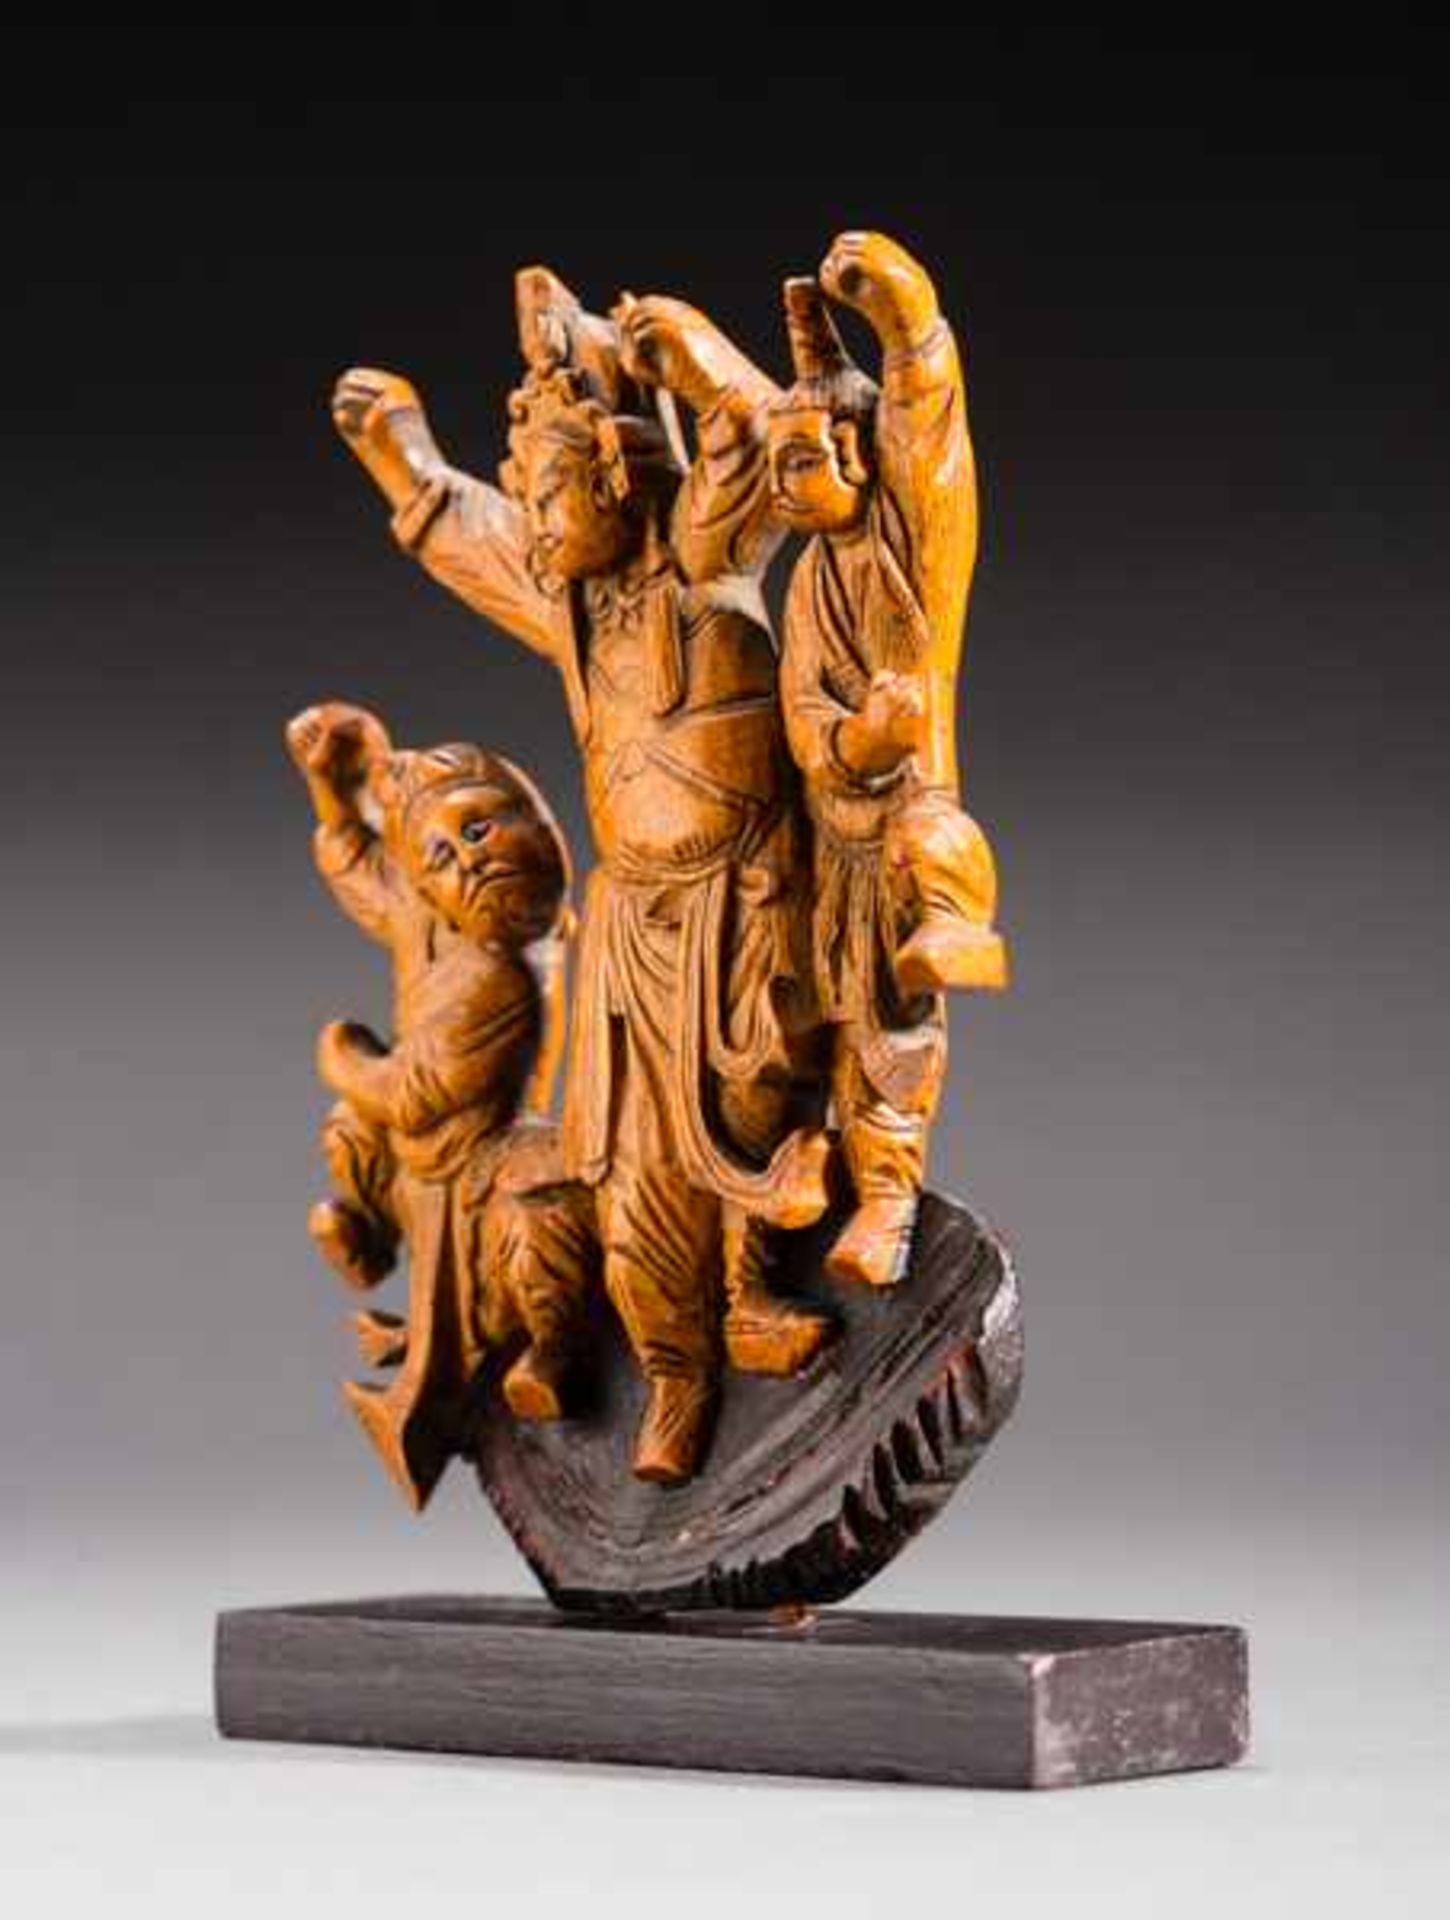 CHINESE THEATER SCENE Wood. China, 19th to early 20th cent.Three dancing figures, dressed in - Image 3 of 4